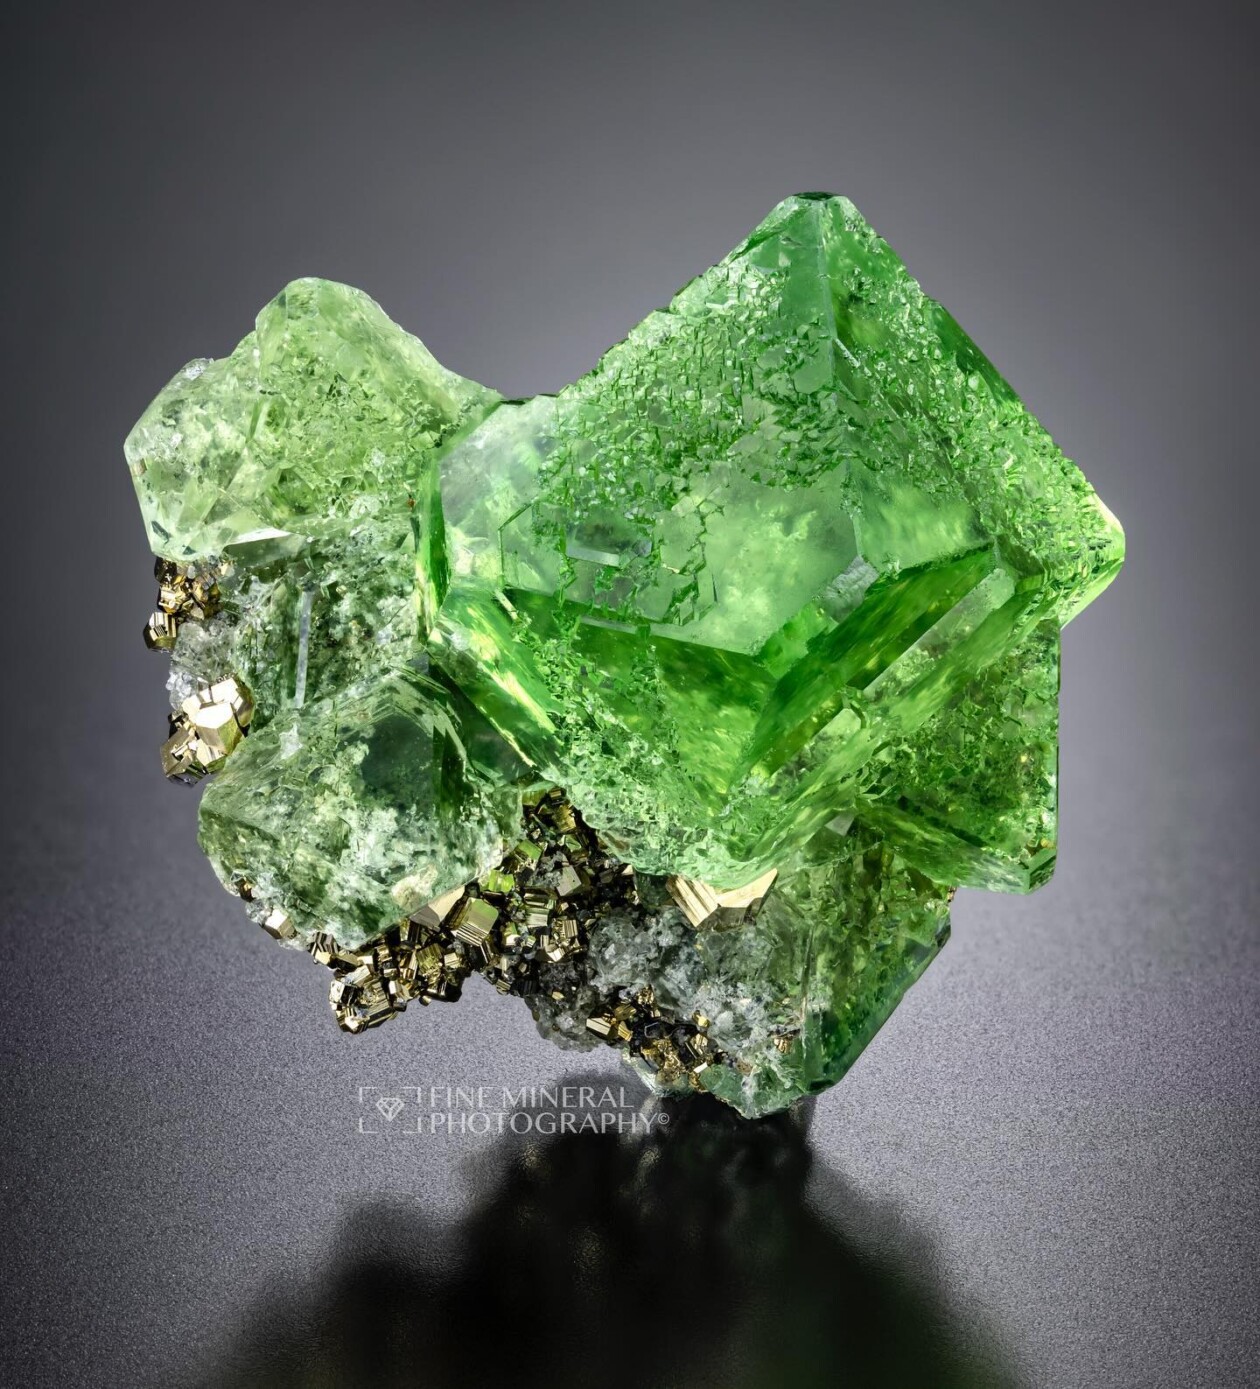 The Magnificent Mineral Photography Of Laszlo Kupi (7)